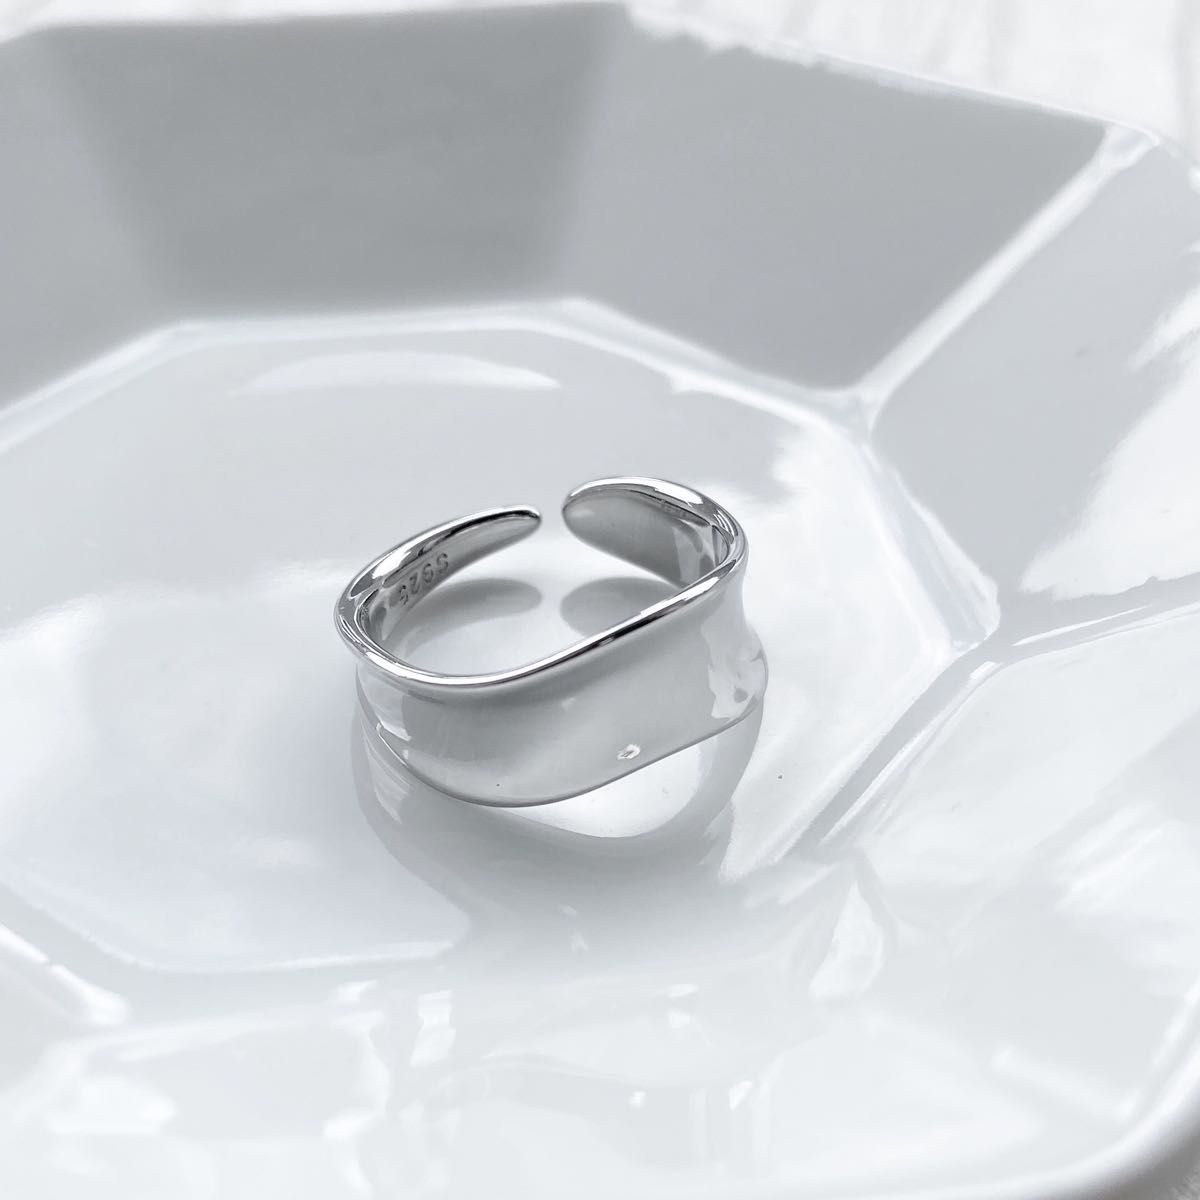  silver ring925 wave design simple open ring シルバーリング